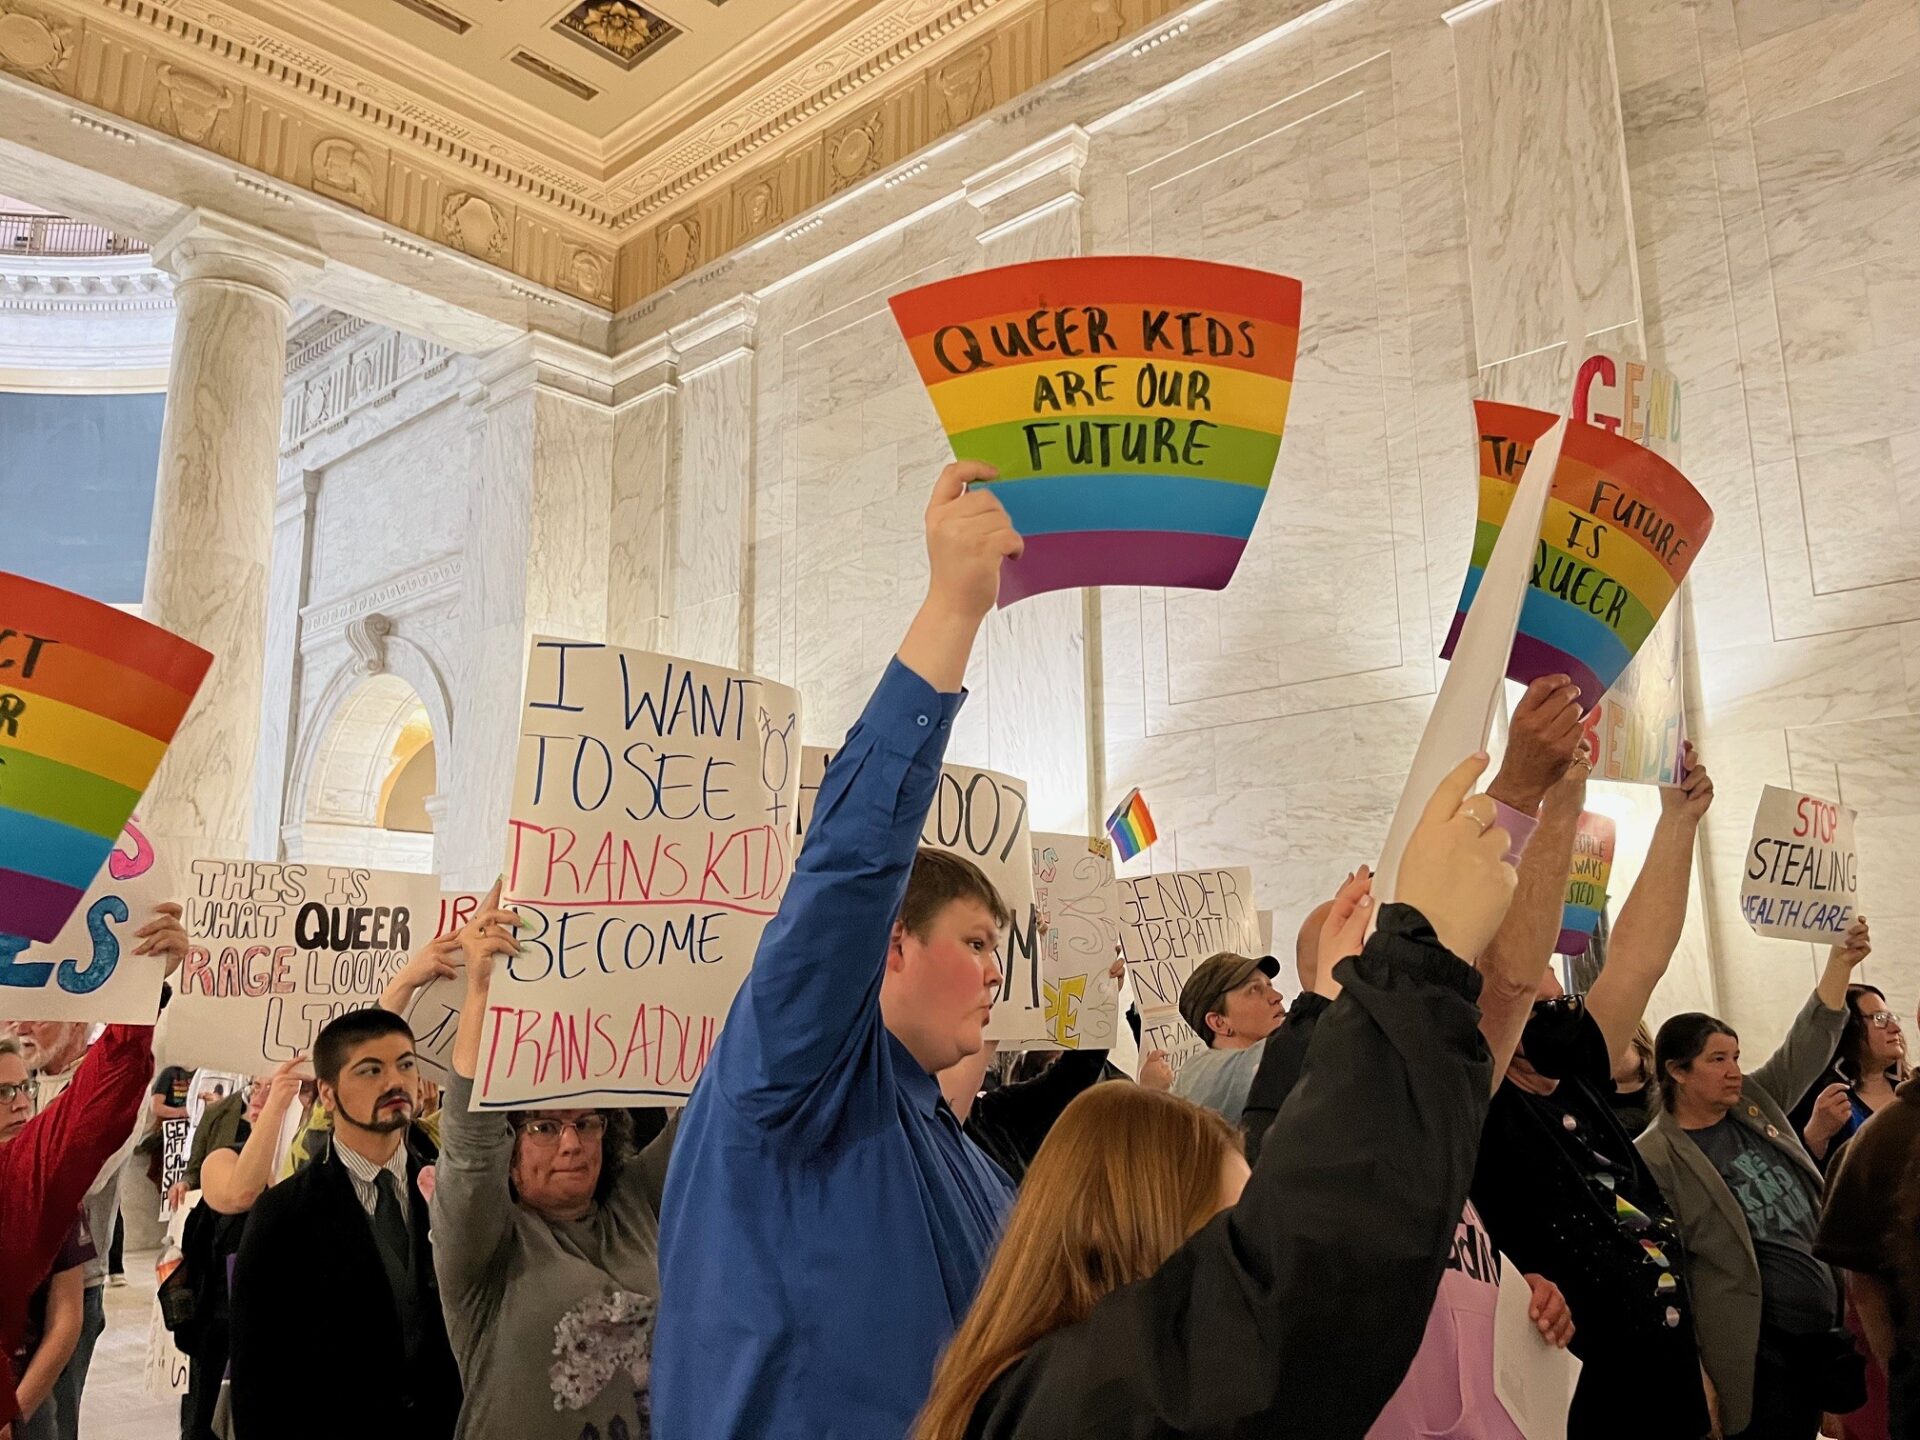 A group of protesters occupy a large space carrying colorful signs.